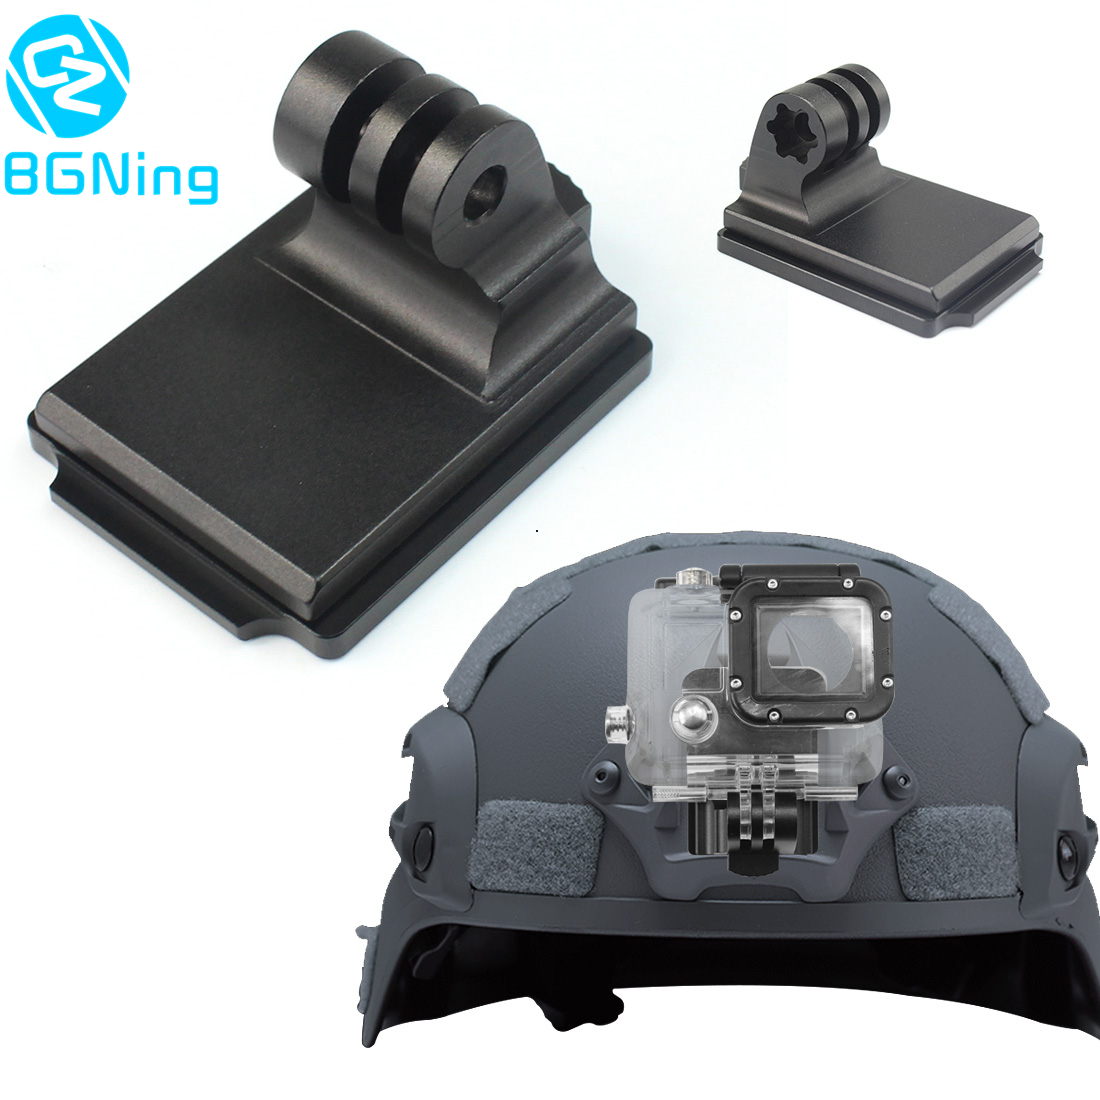 Aluminum Fixed Mount Helmet for GOPRO Hero 1 2 3 3 4 4Session 5 5 Session and NVG Mount Base